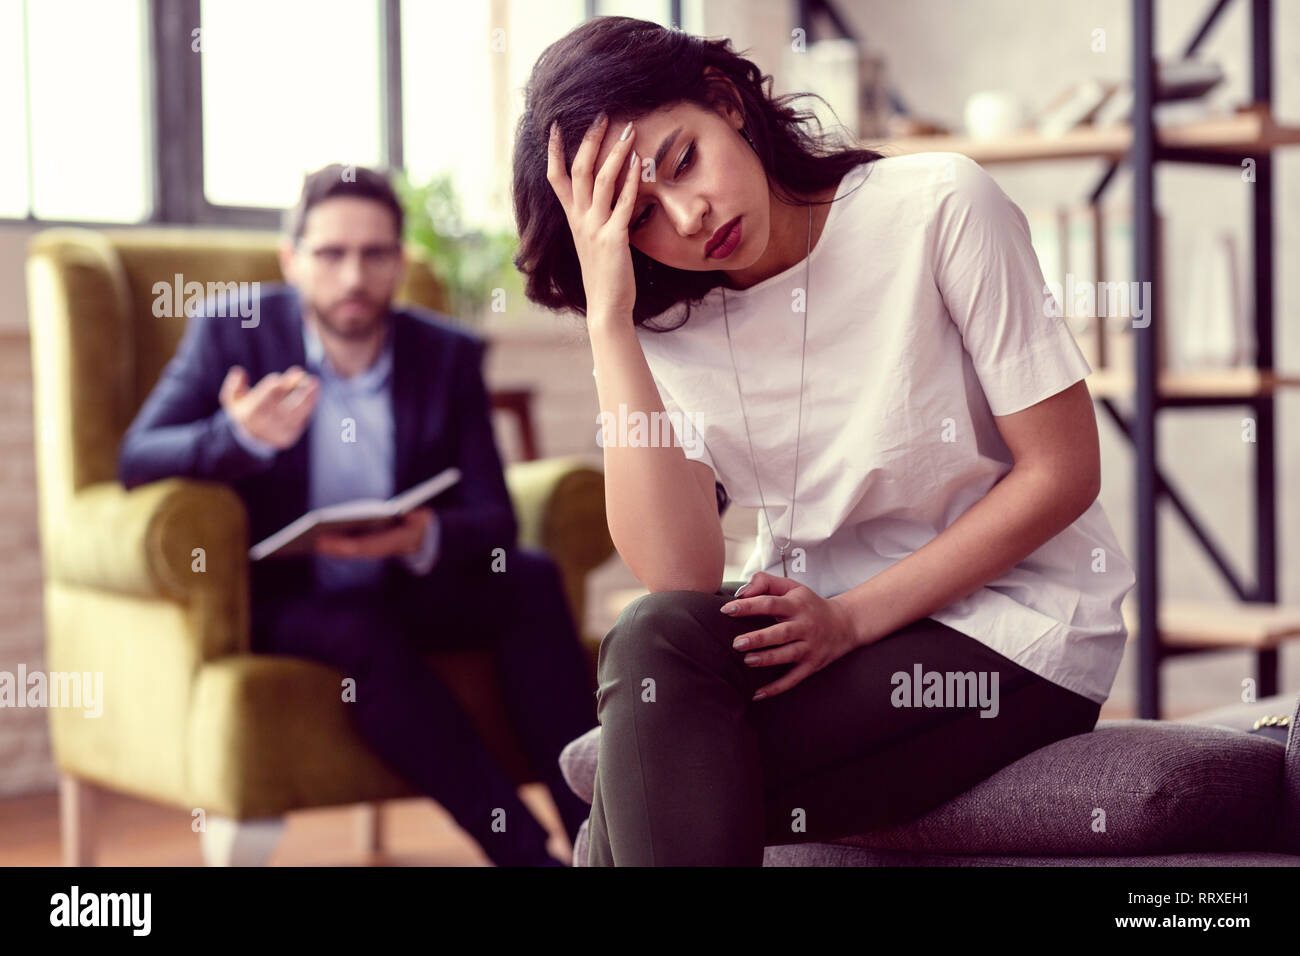 Beautiful young woman focusing on her problems Stock Photo